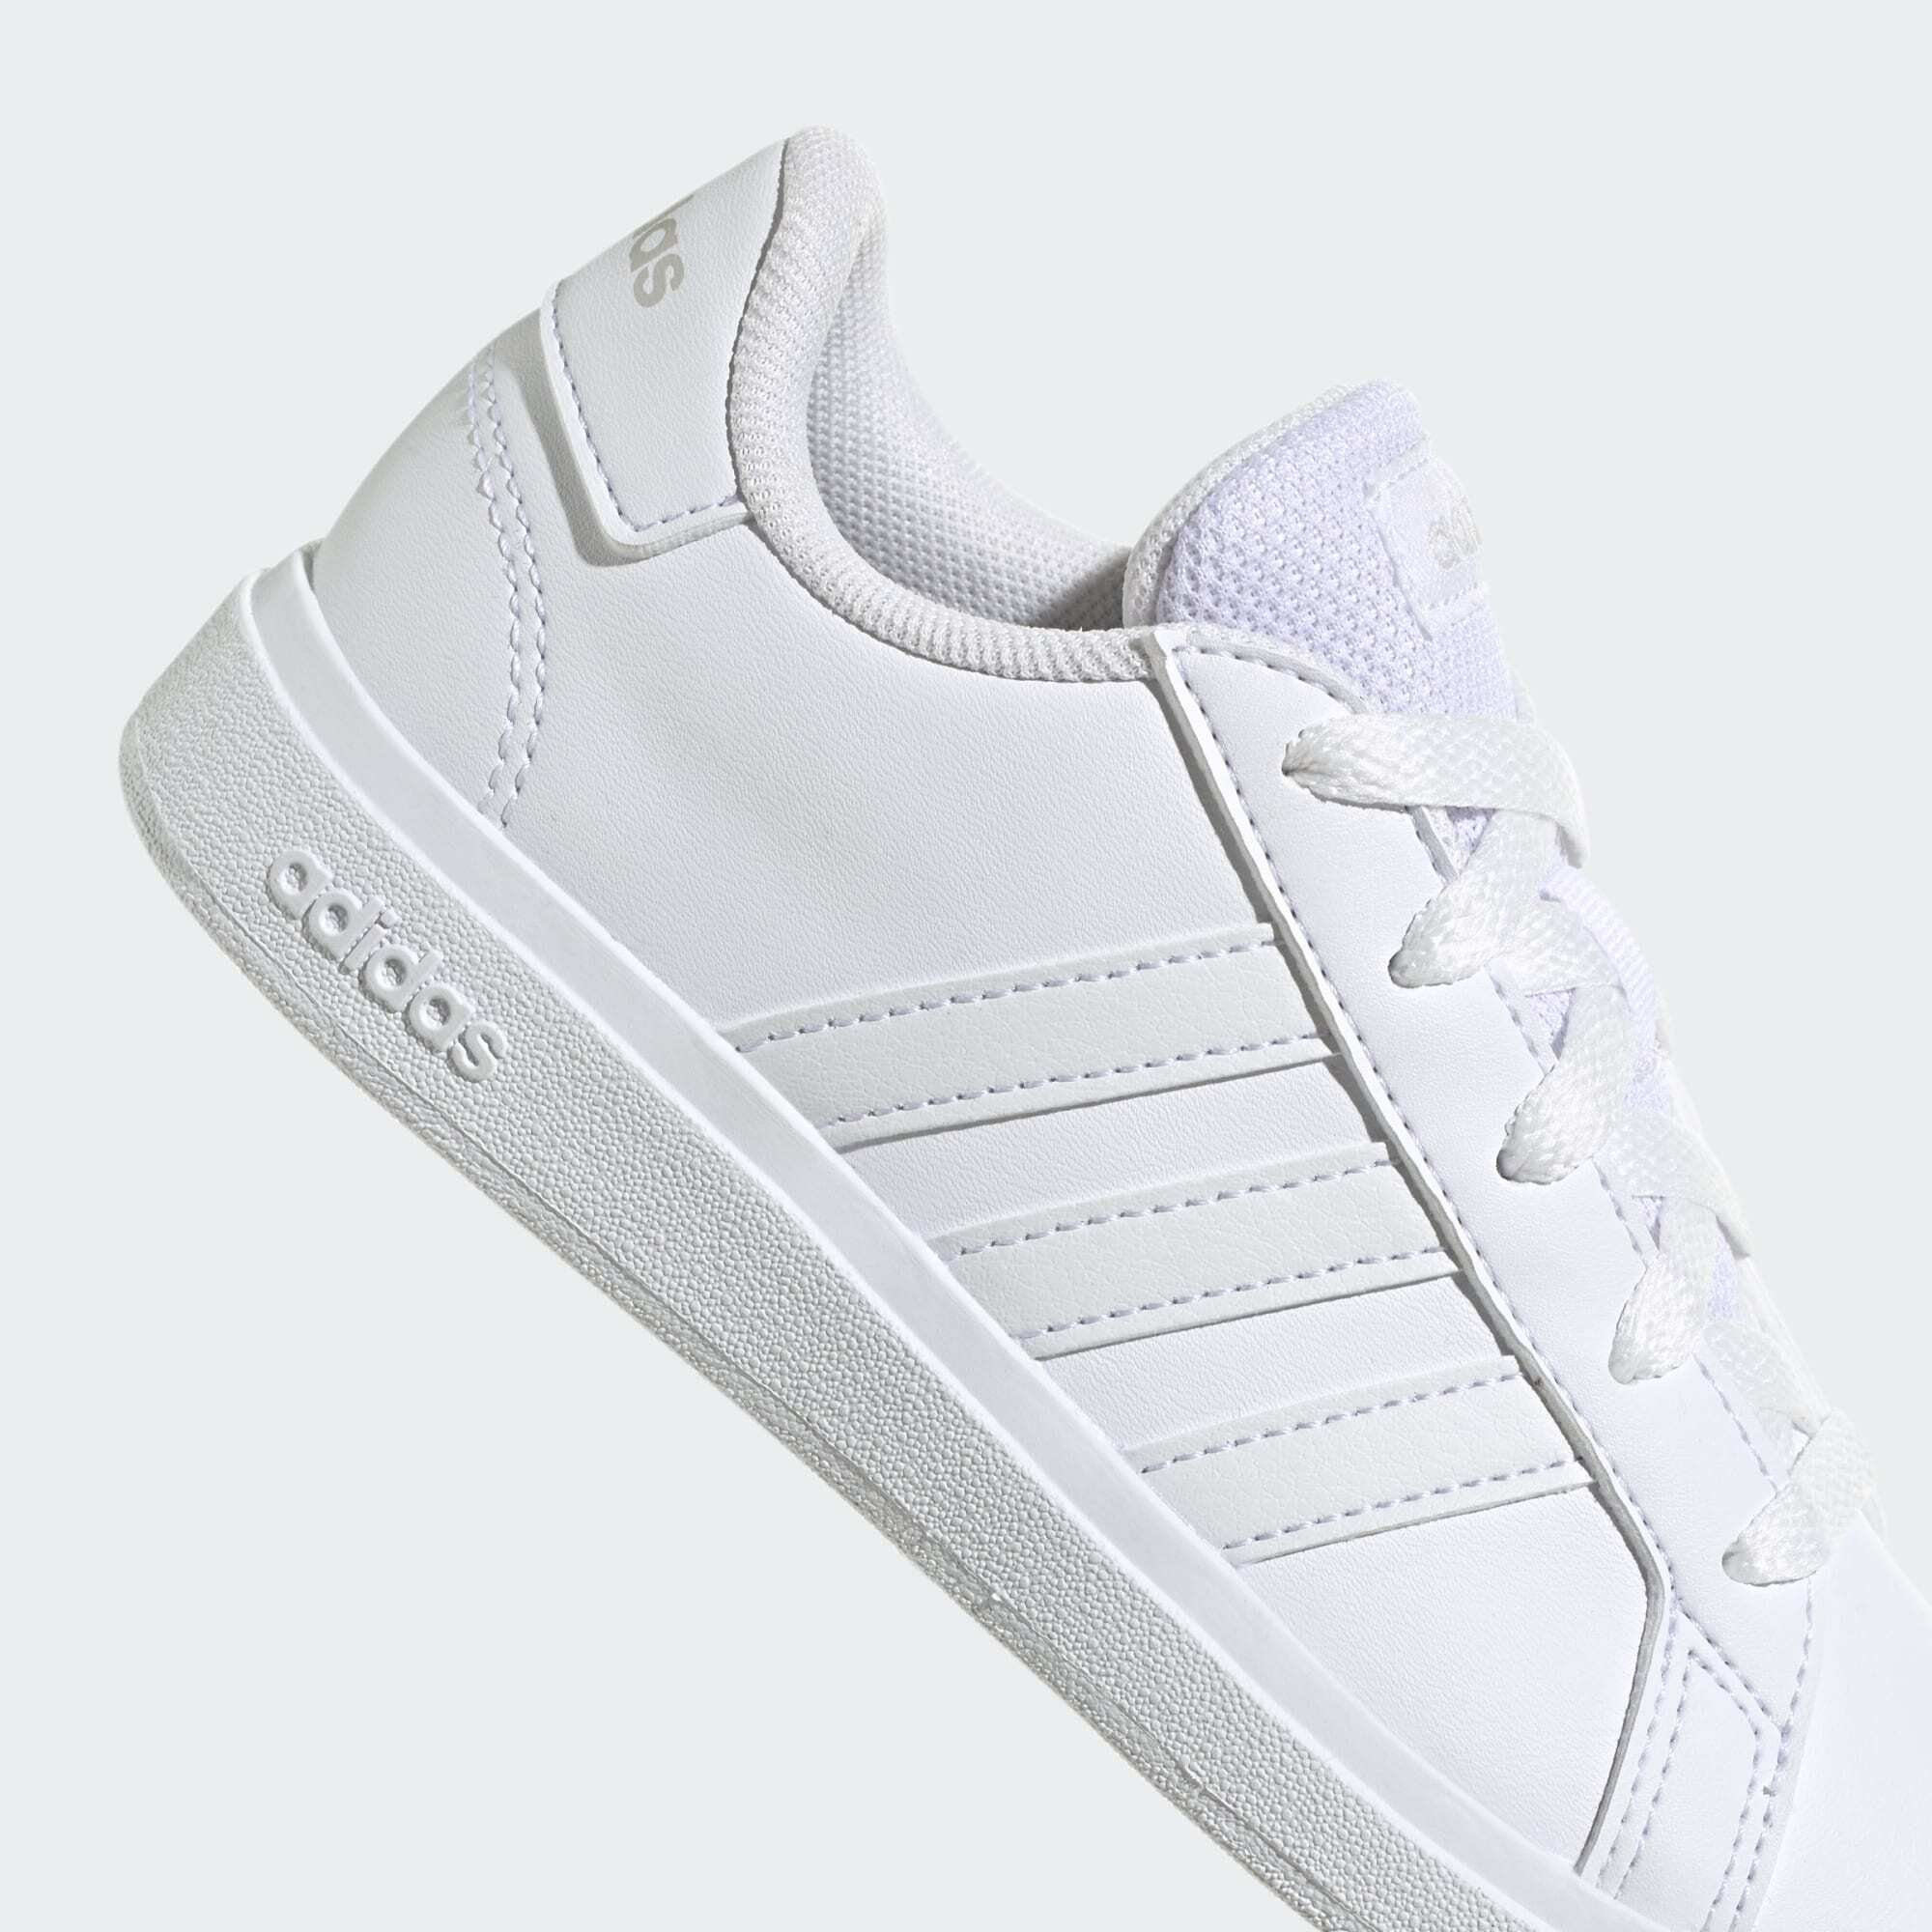 adidas Grey Sportswear One COURT White LACE-UP TENNIS Cloud LIFESTYLE / SCHUH Sneaker Cloud / GRAND White